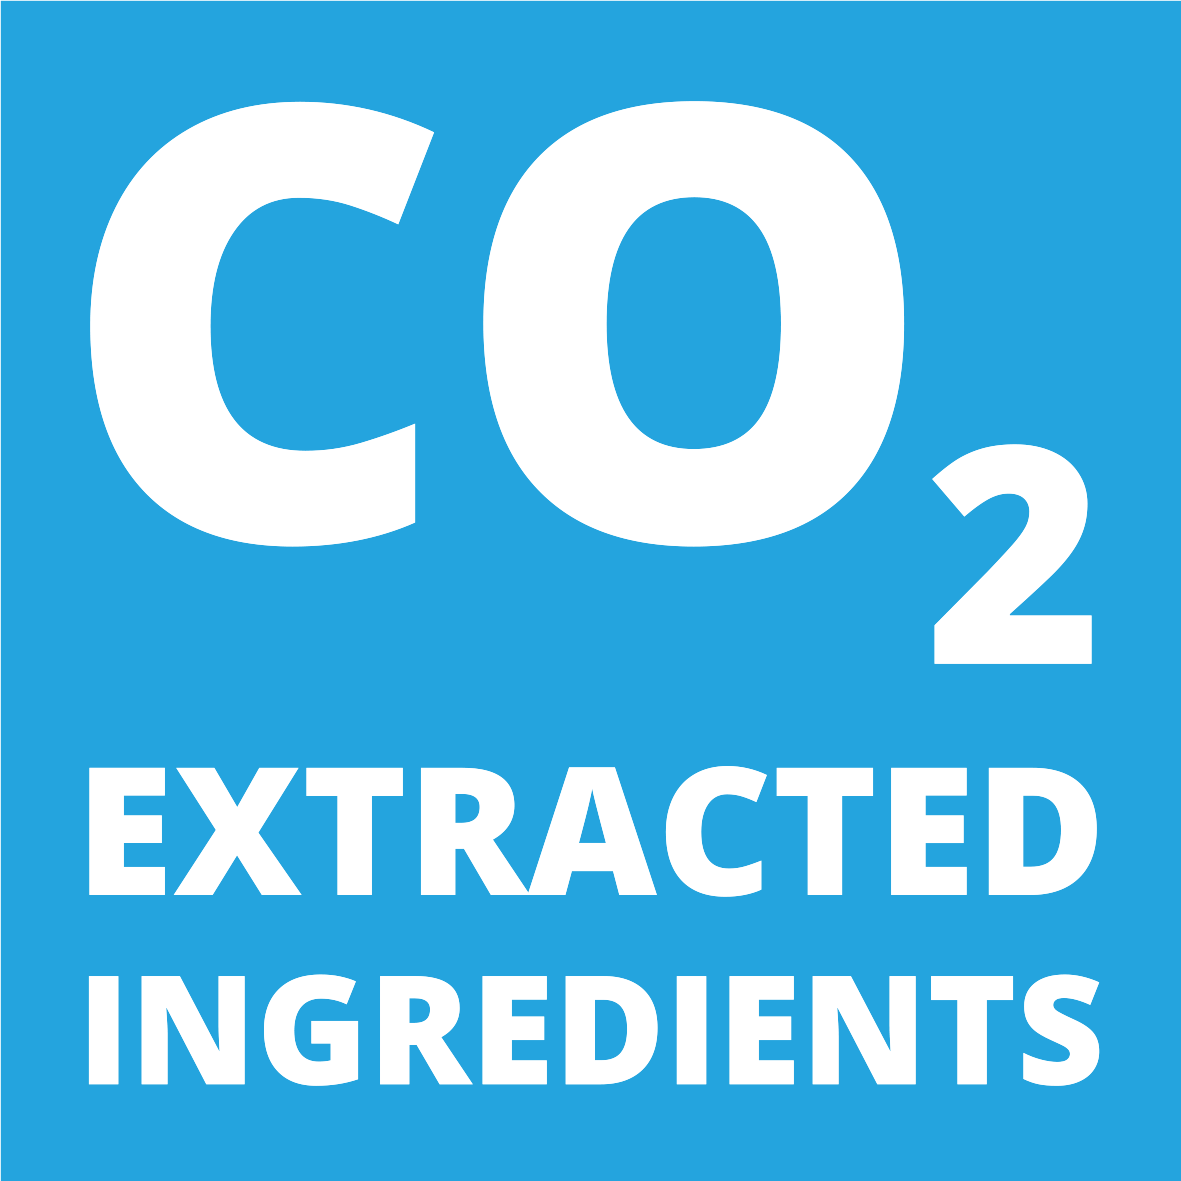 CO2 extracted ingredients 